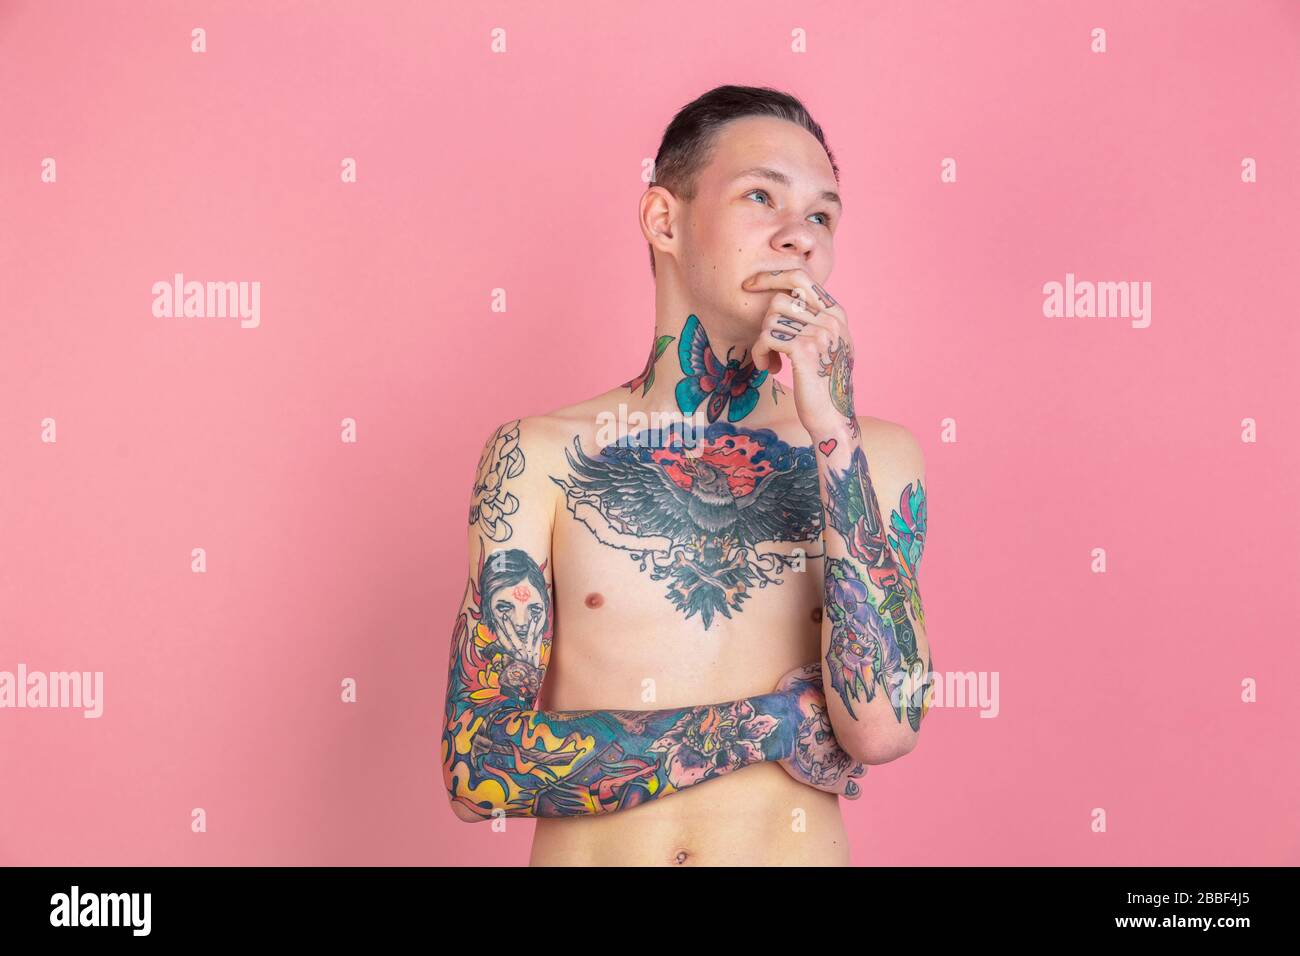 Thinking. Portrait of young man with freaky appearance on pink background. Unusual look with huge tattooes. Doing daily routine. Human emotions, facial expression, sales, ad concept. Youth culture. Stock Photo